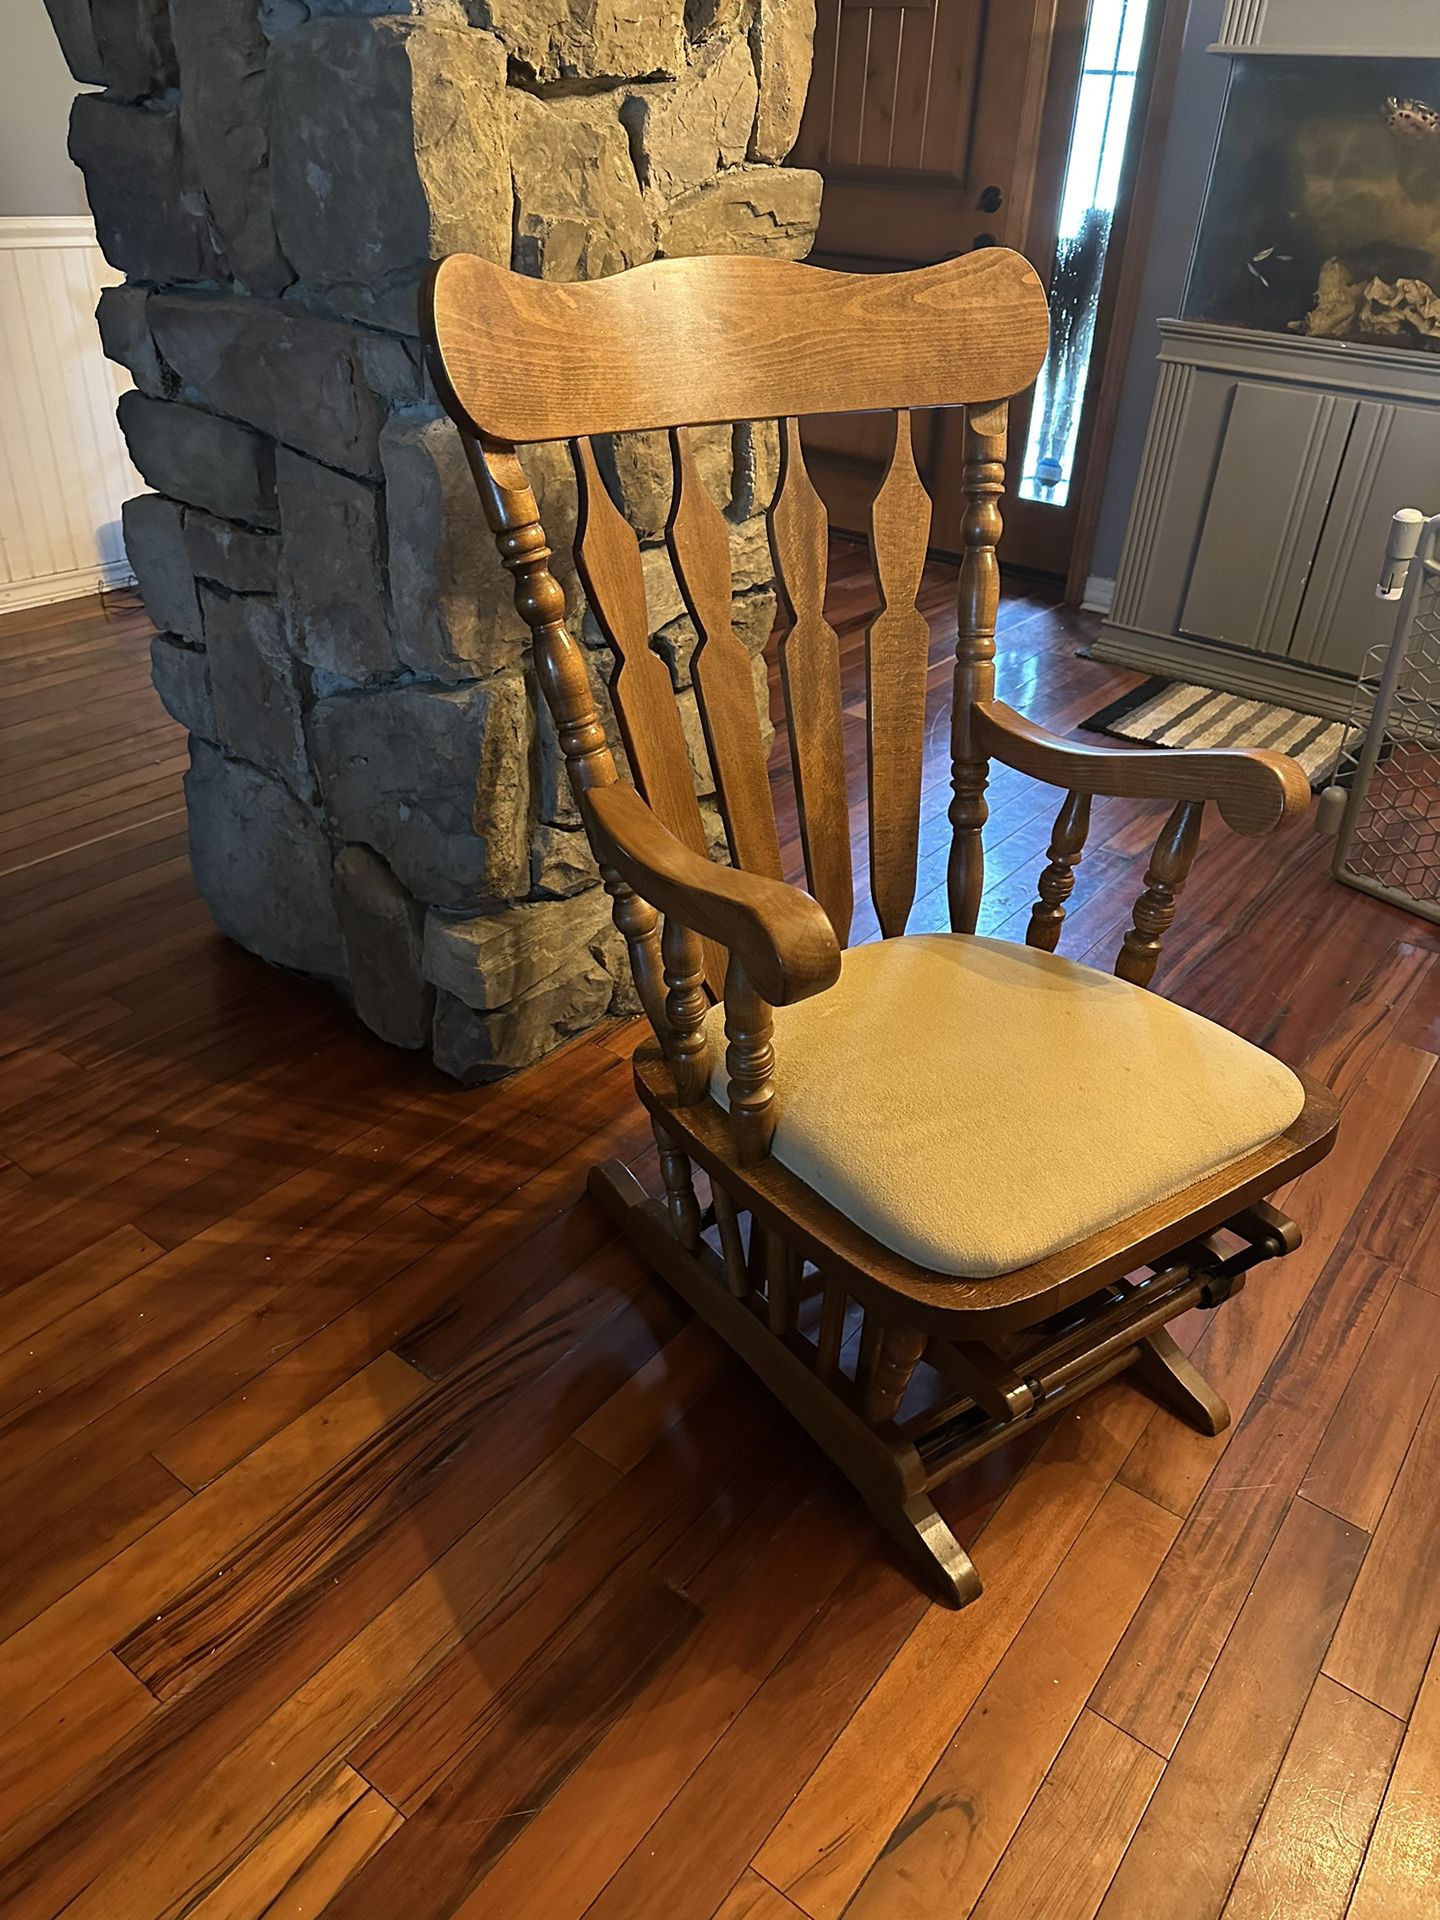 Antique Gliding Rocking Chair   Highly Collectible   Excellent Condition   Came from Millersburg Ohio Hand Made  Hard to find this quality and conditi